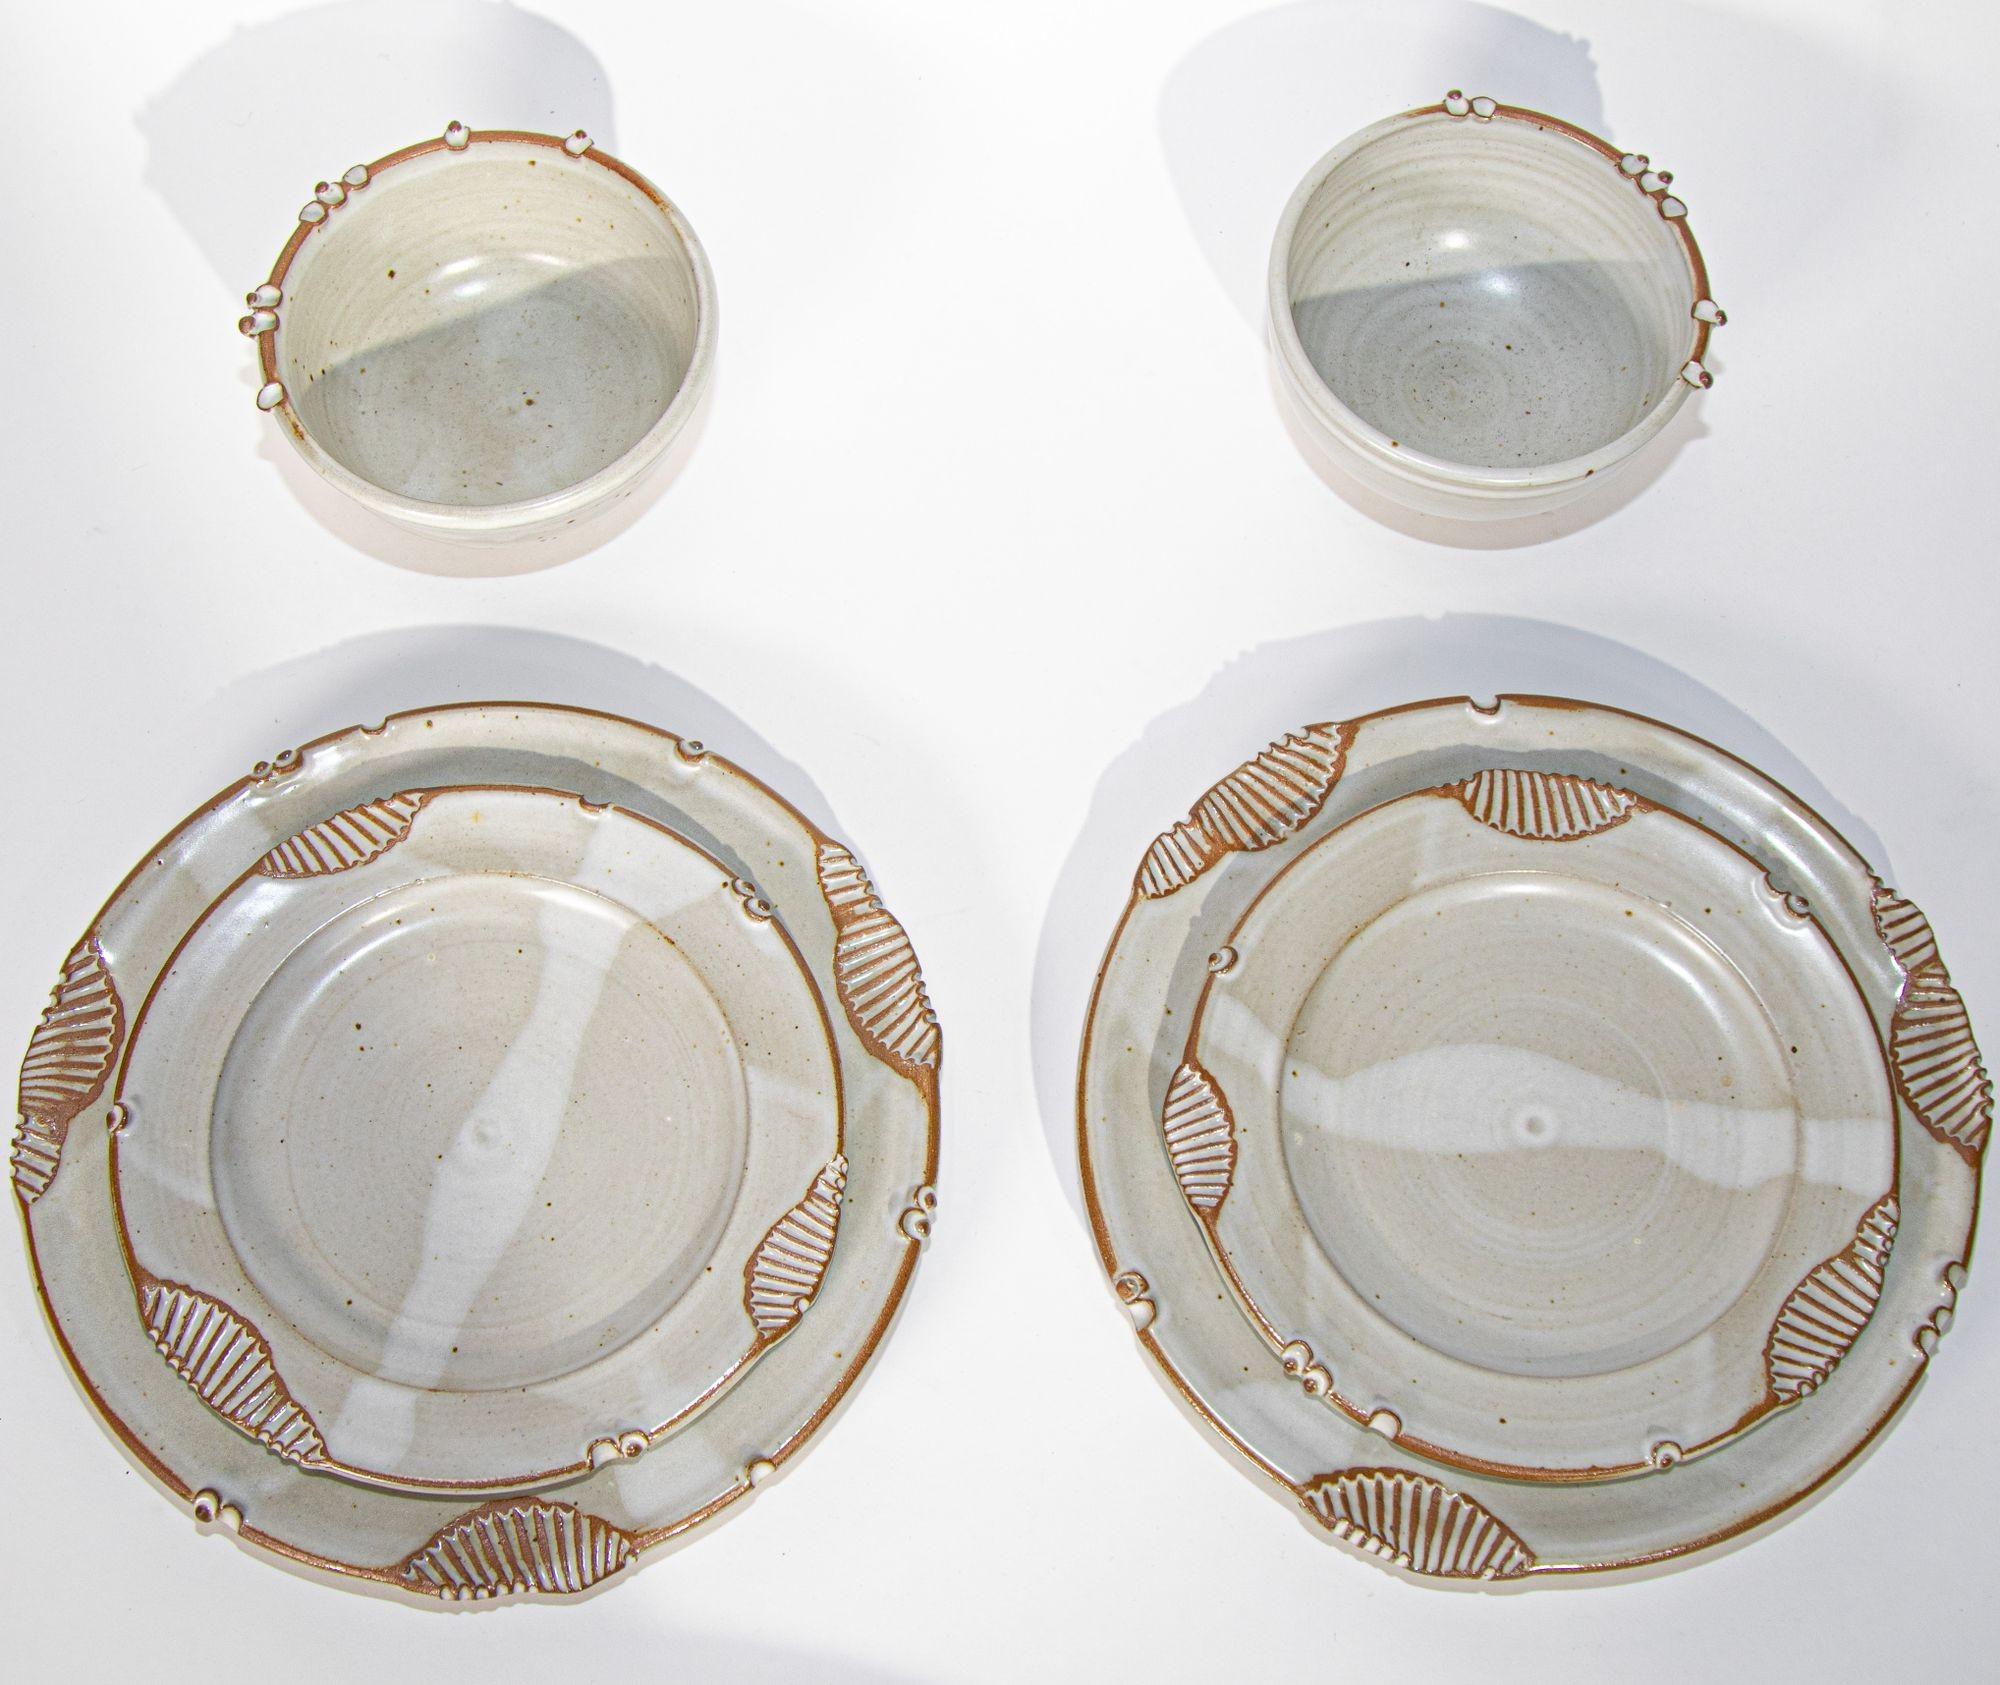 Paul Anthony vintage stoneware service set of 6.

Paul Anthony Modernist Studio Art Pottery Stoneware set for 2, 2 dinner plates, 2 salad plates and 2 Cereal bowls.

Colors are Cream & Brown.

Vintage signed Paul Anthony Abstract Modernist